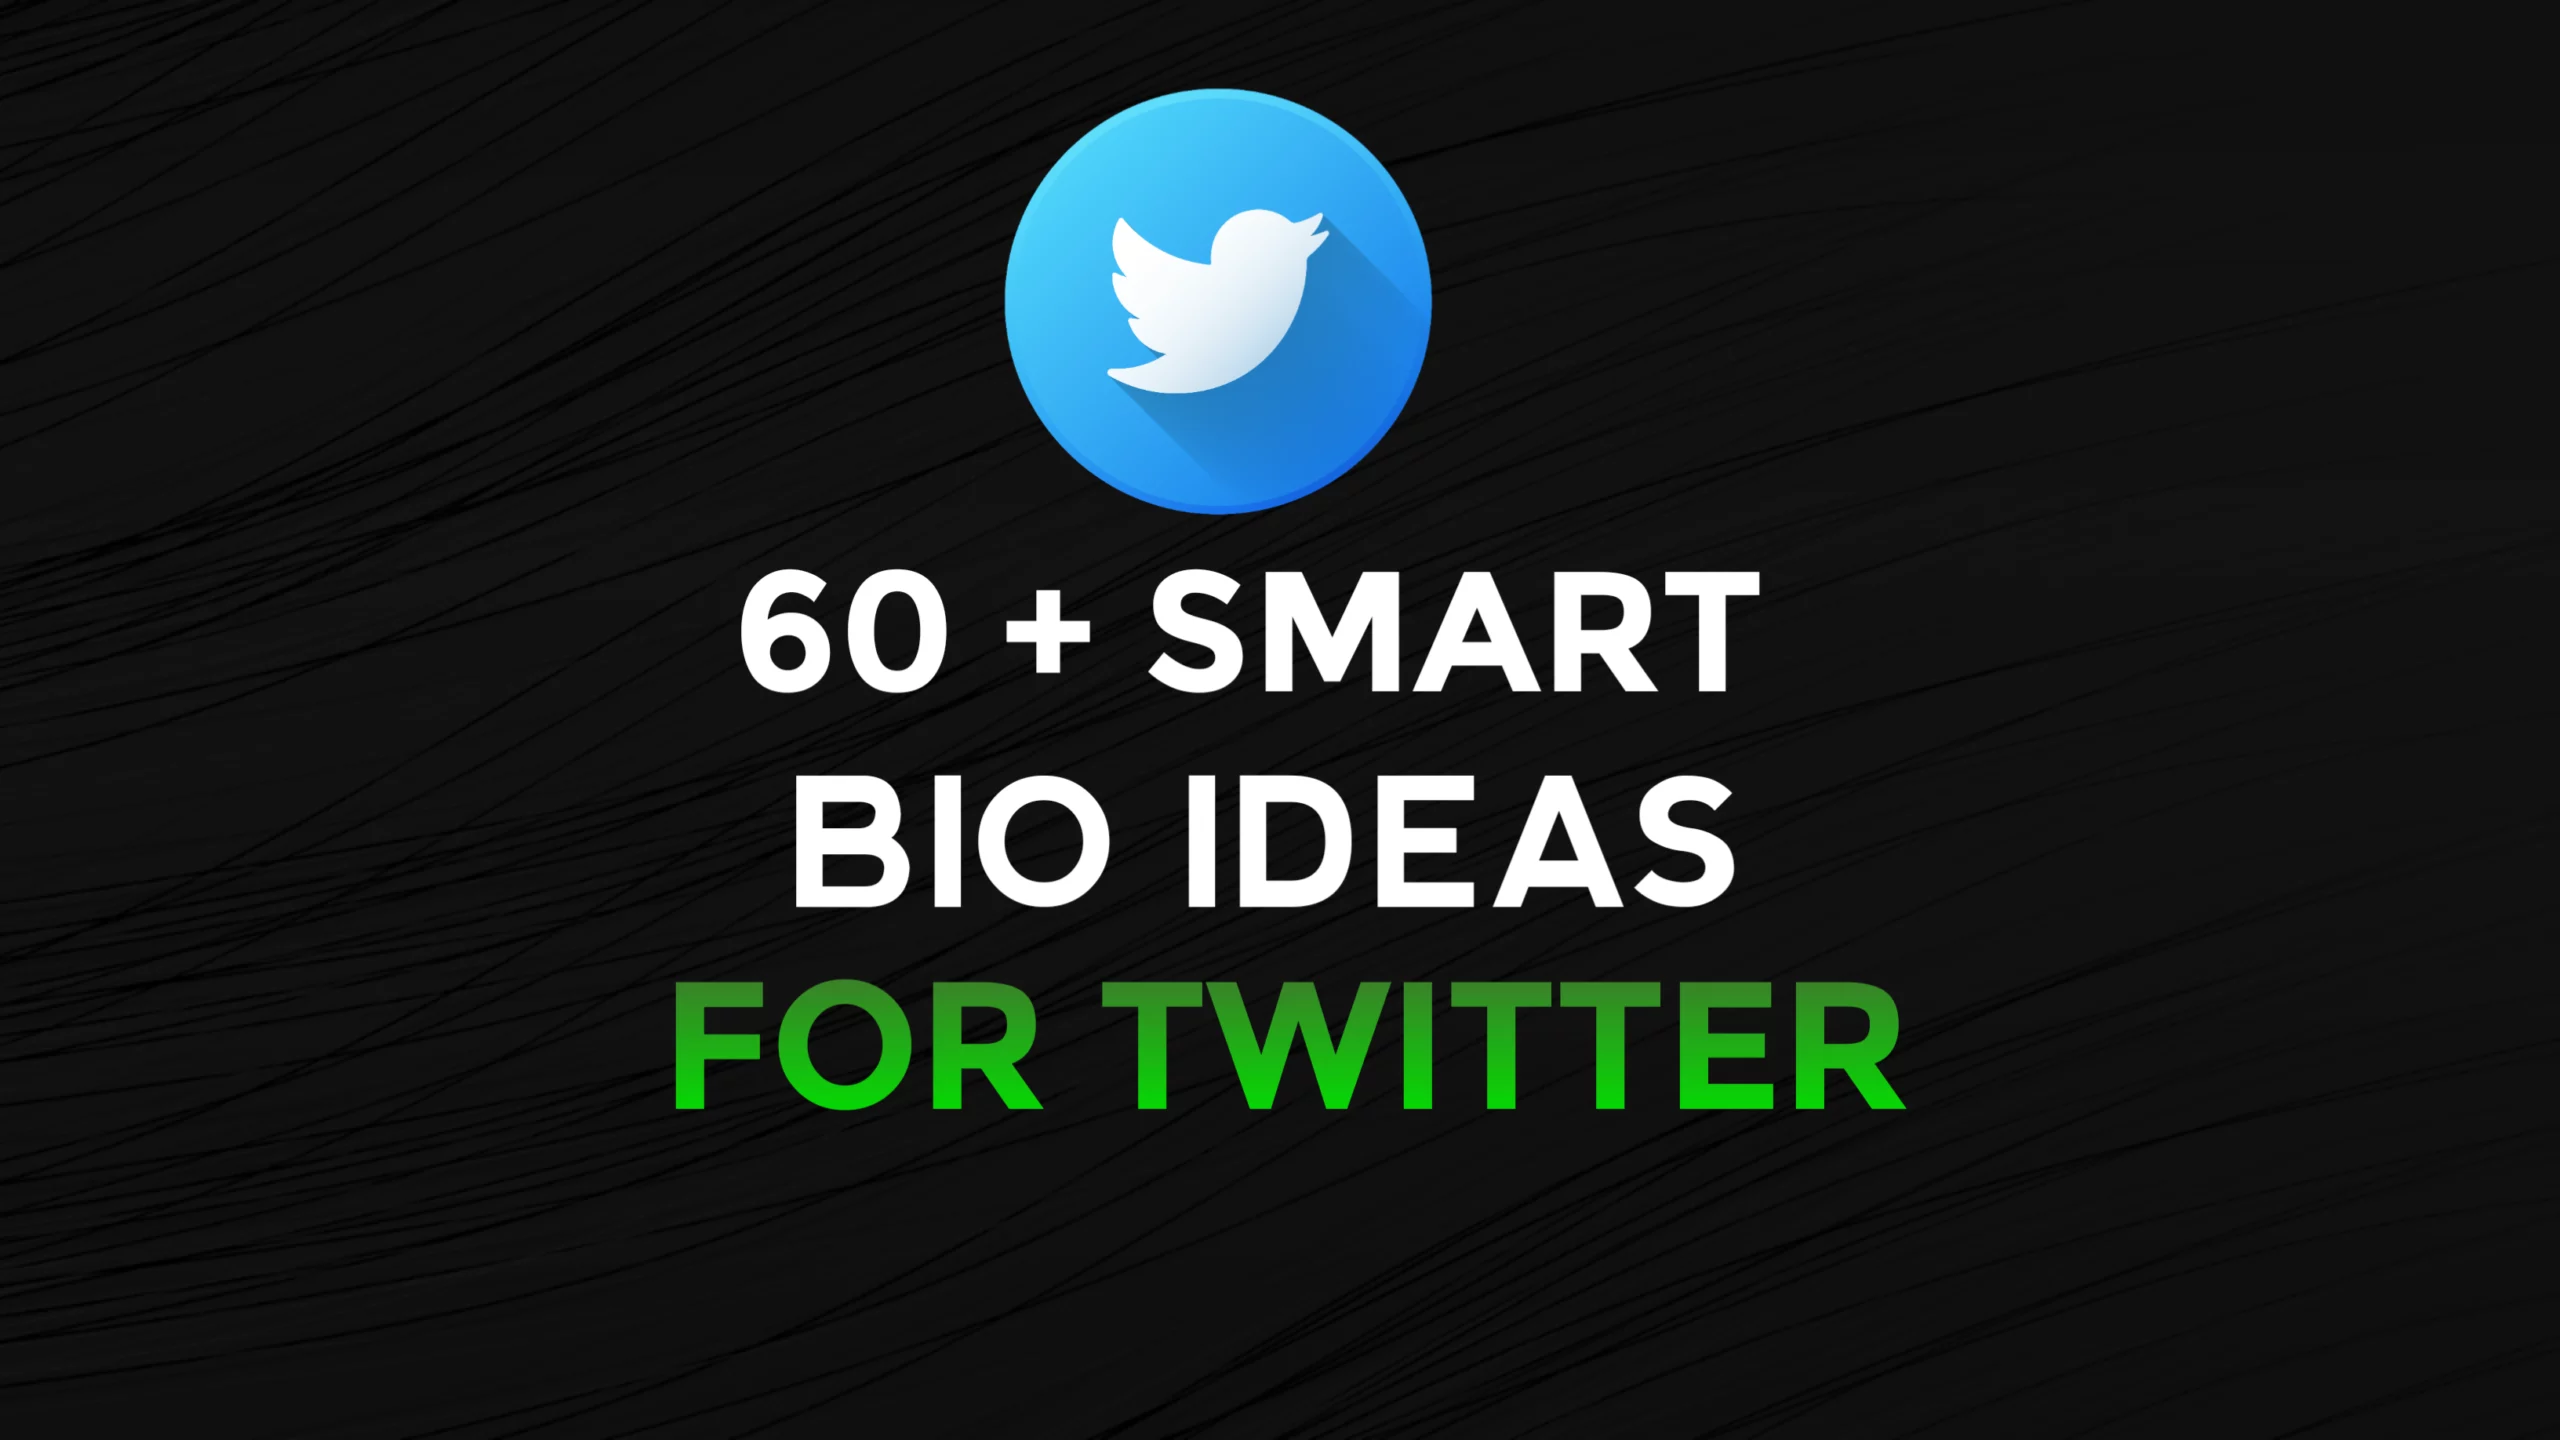 60+ Smart Bio For Twitter Ideas That Different From Others